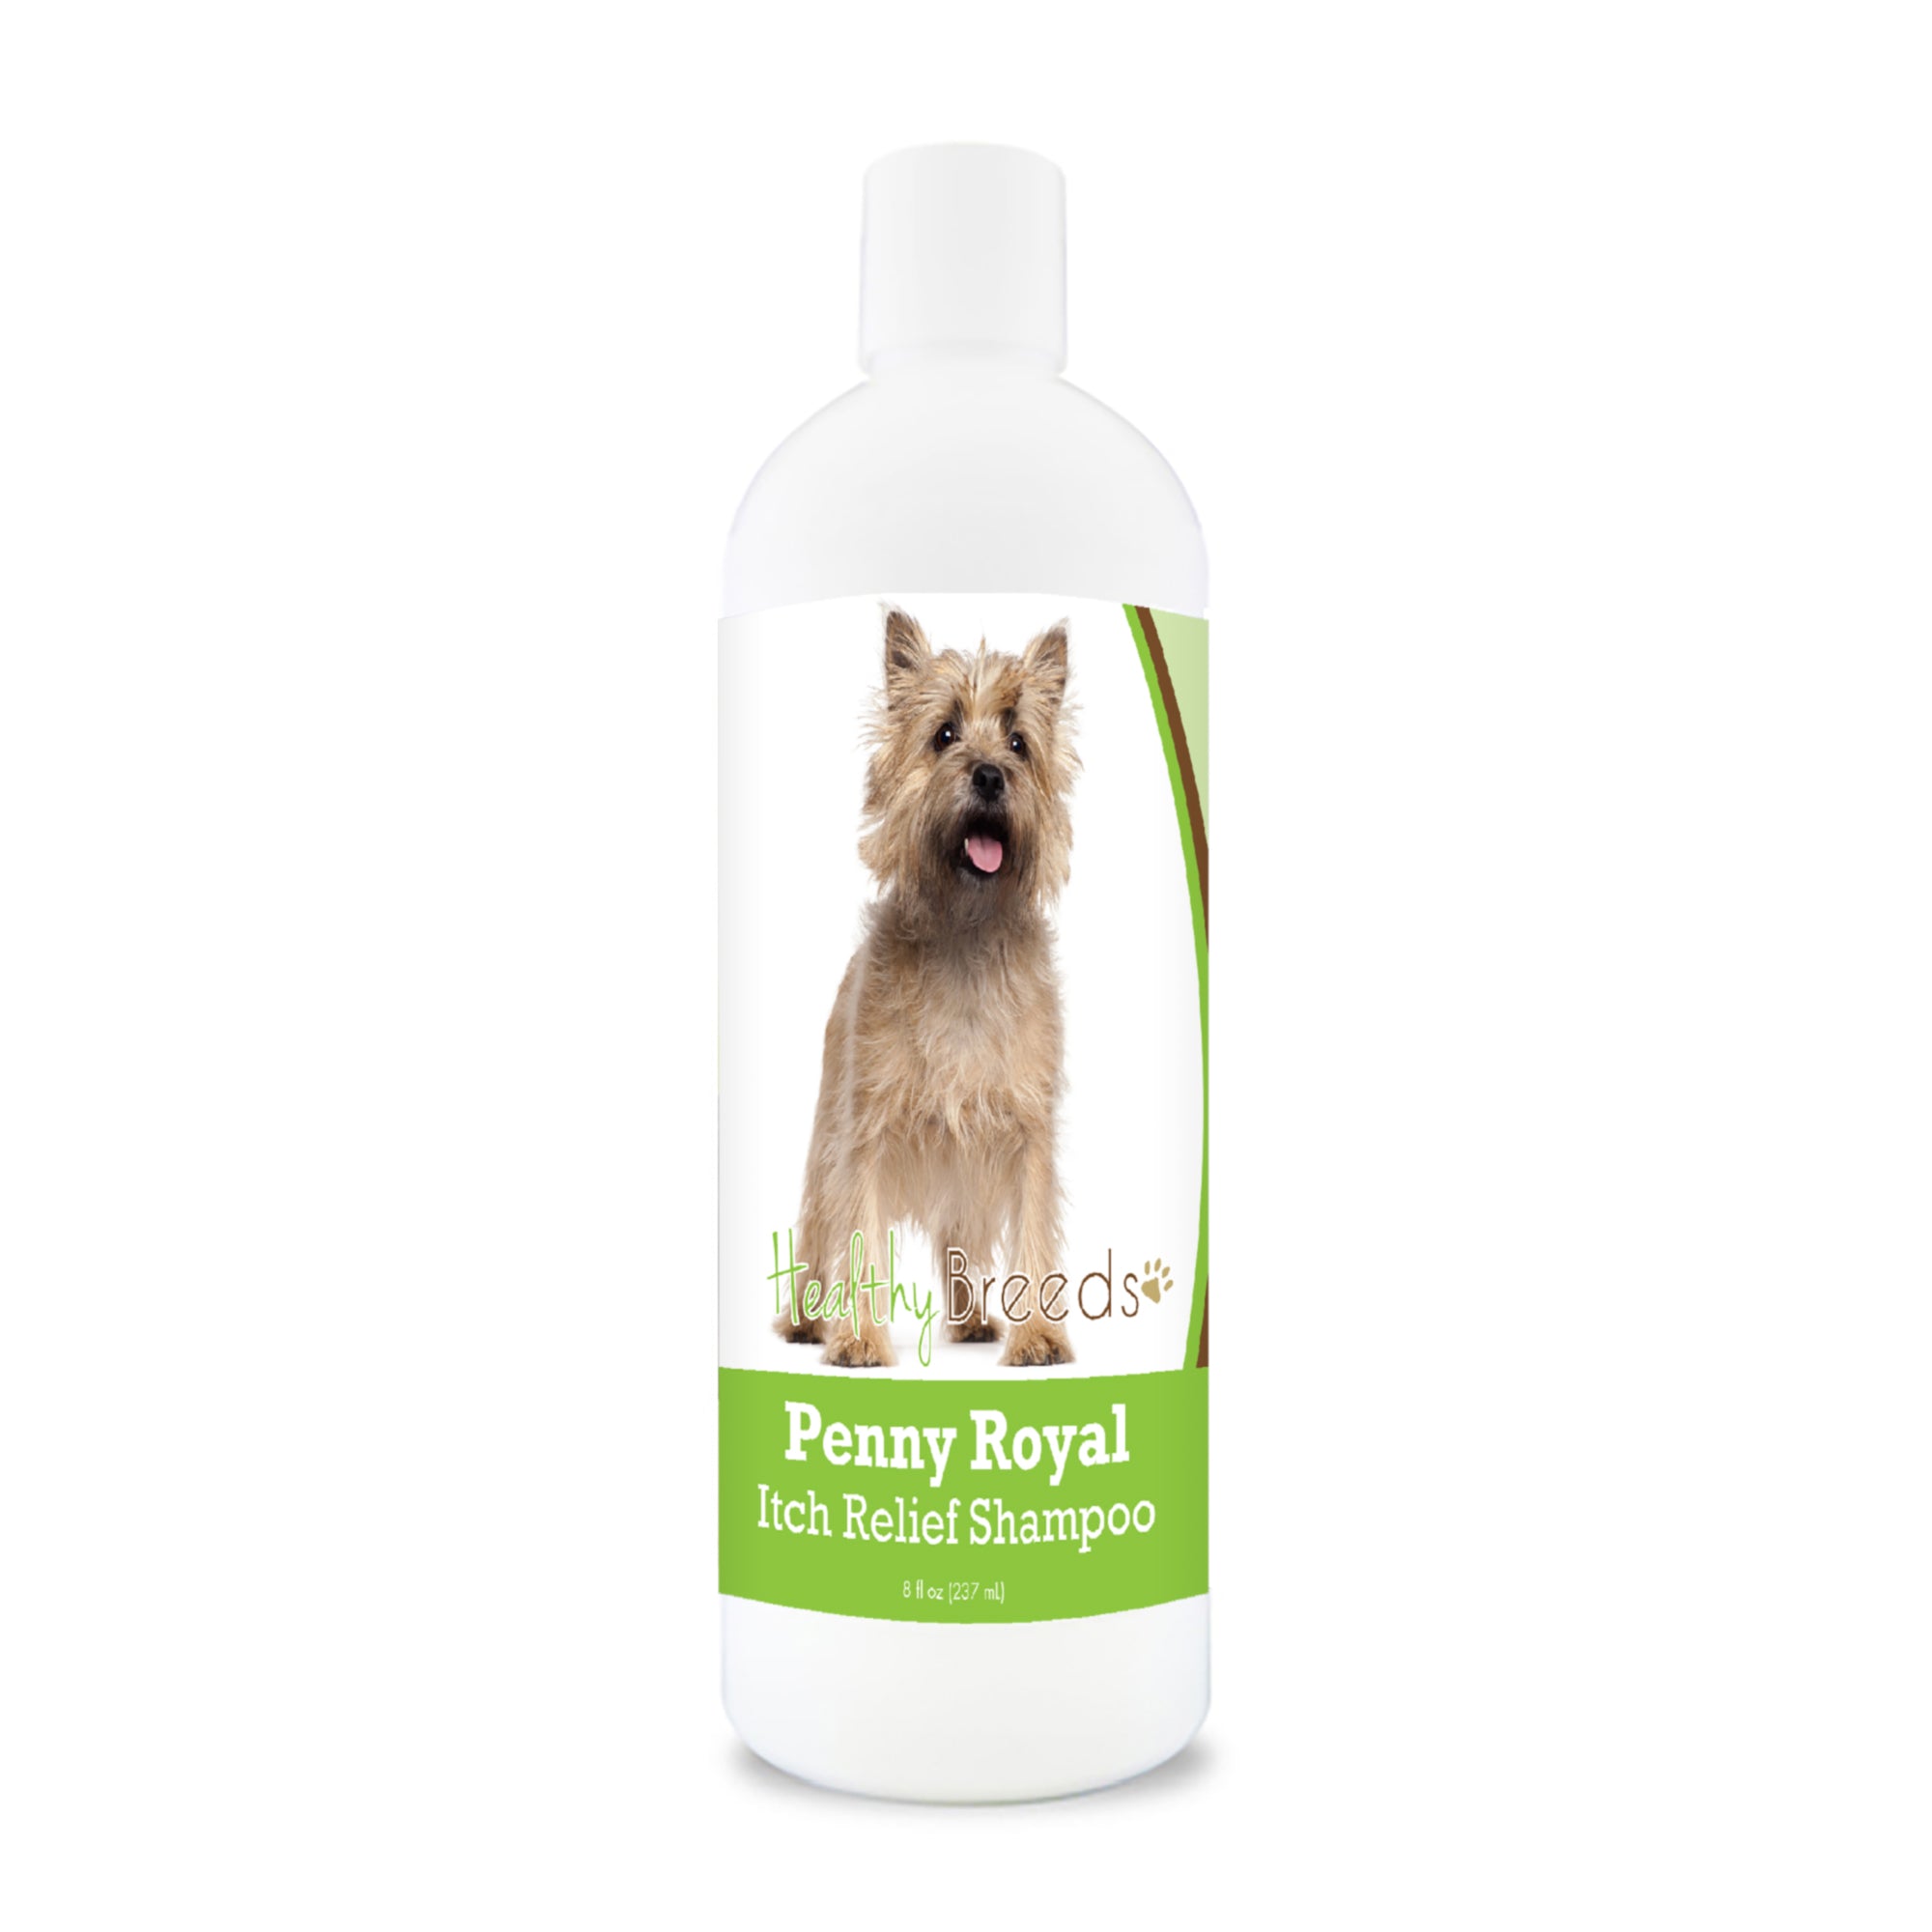 Cairn Terrier Penny Royal Itch Relief Shampoo 8 oz